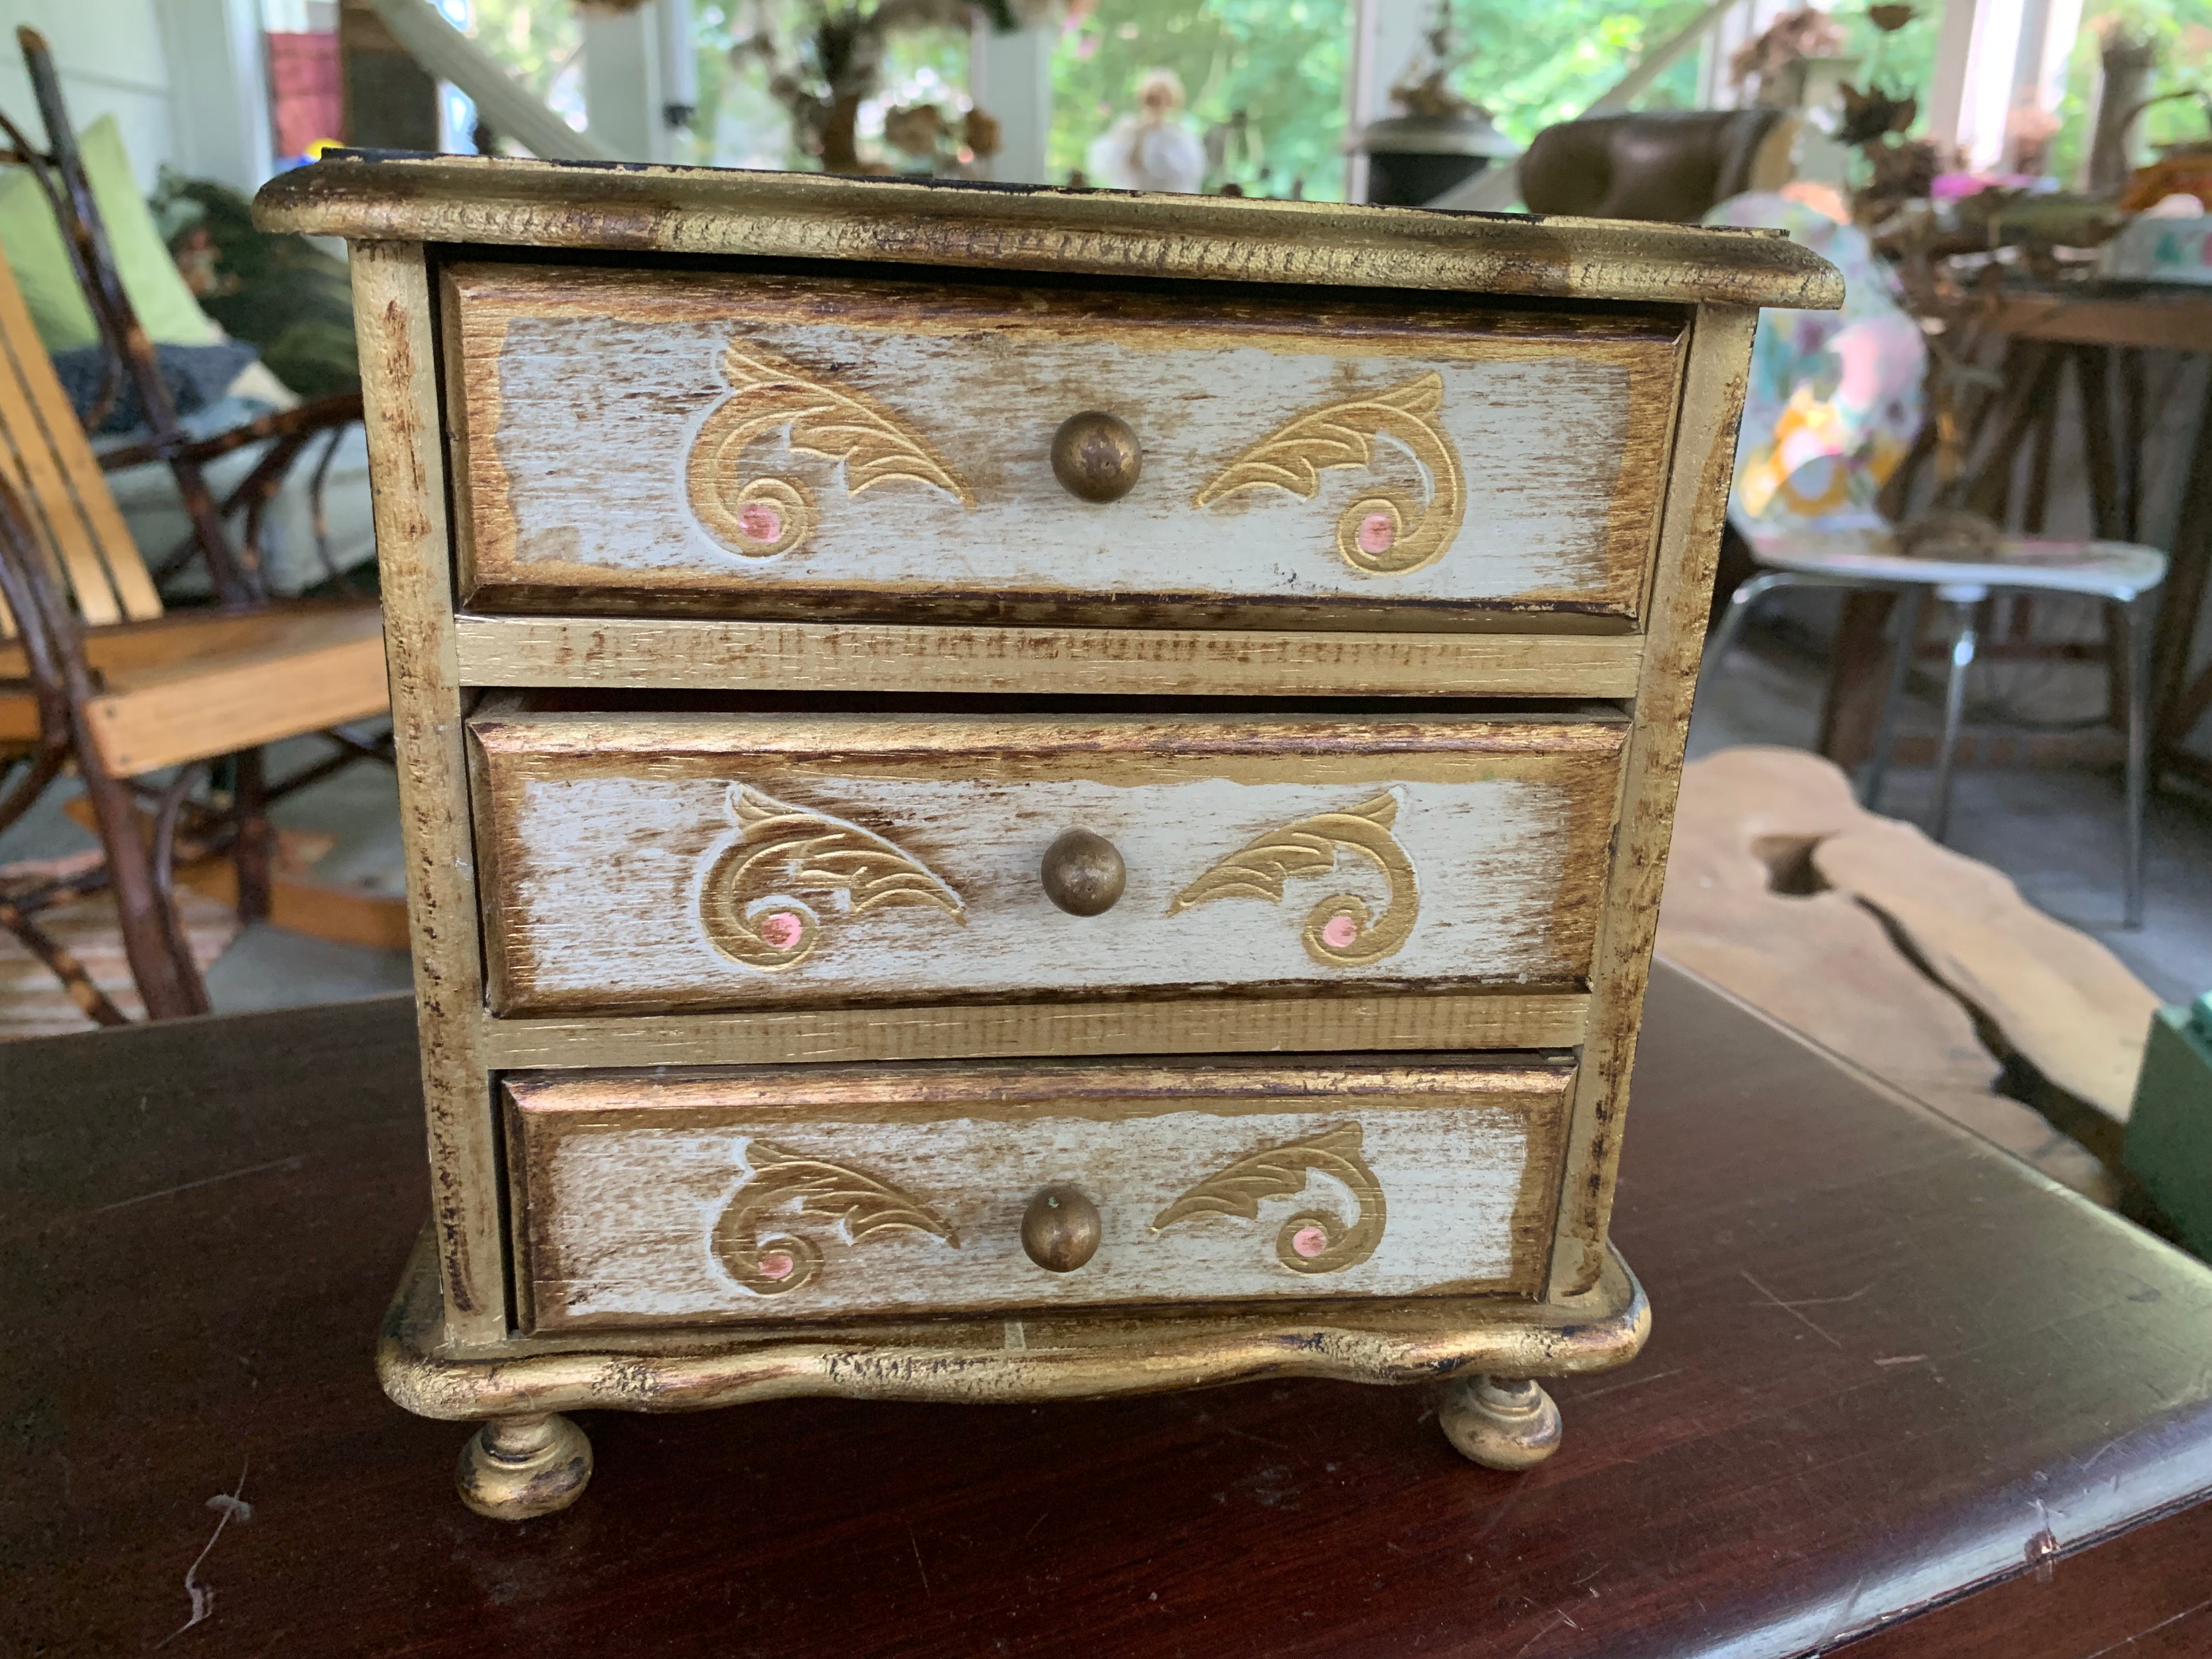 Vintage Florentine Jewelry Box, Gold and White, Wooden